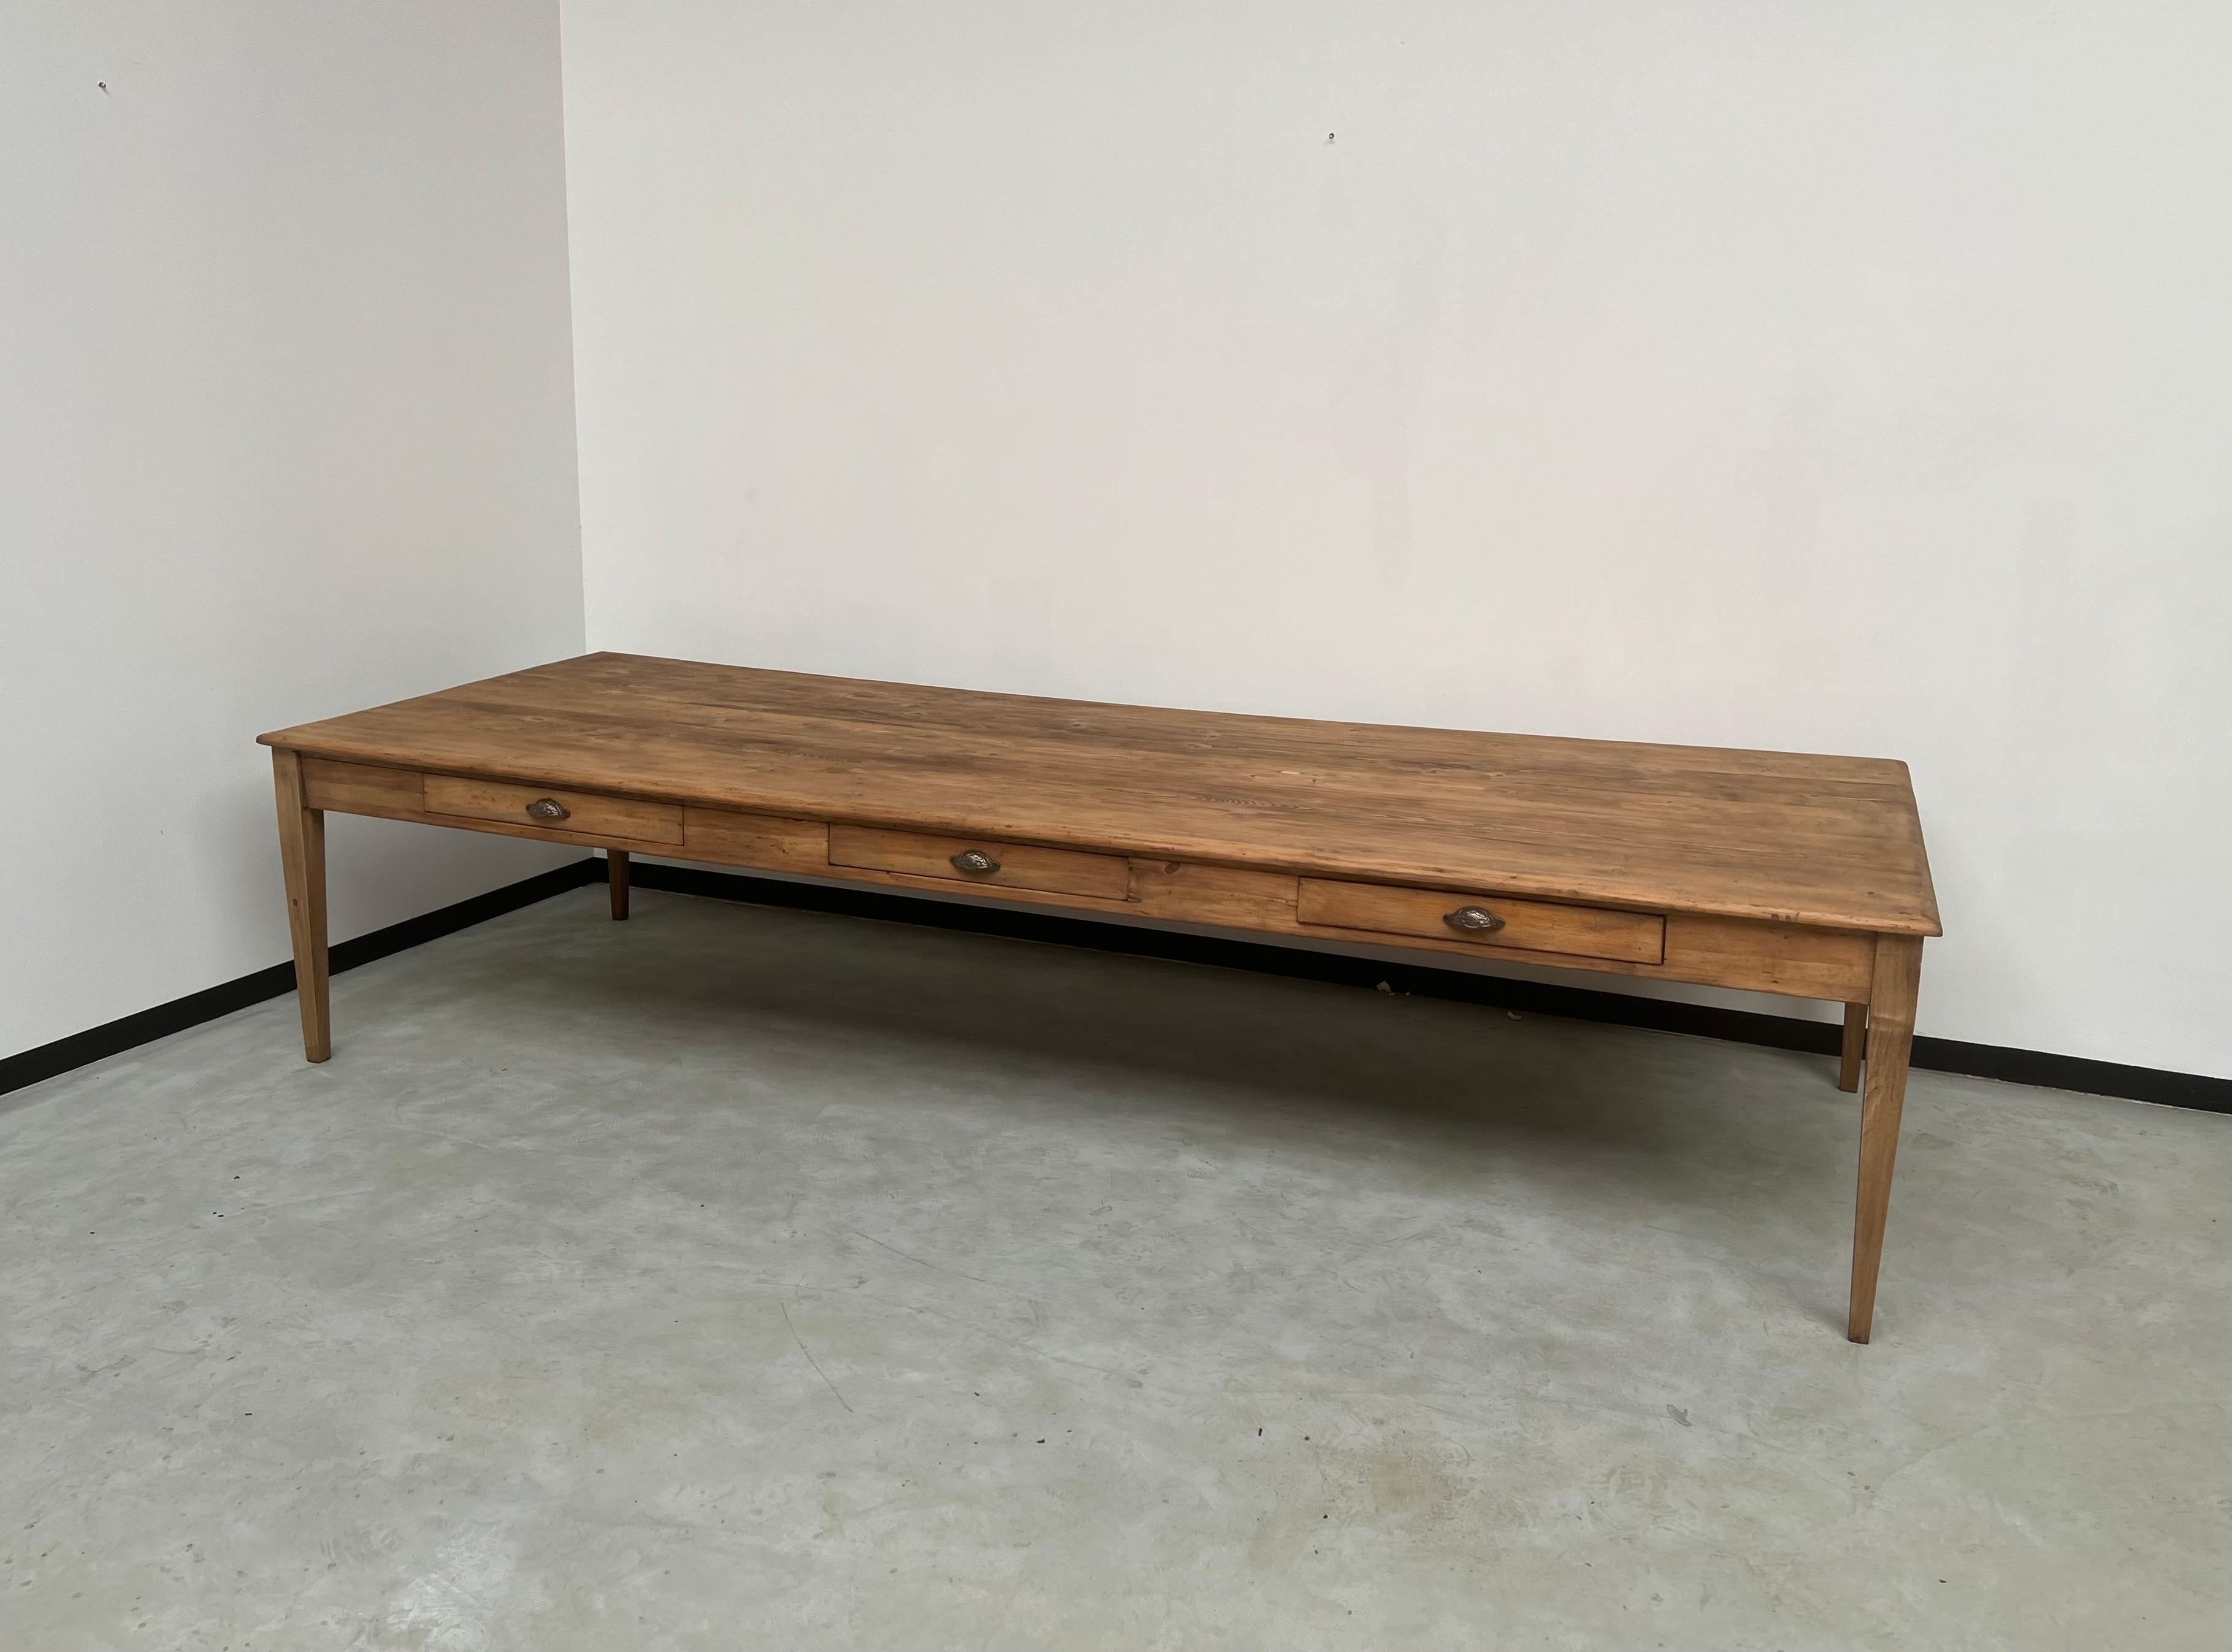 This superb farm table from the 50s is made of solid pine. It consists of 5 drawers + 1 false drawer taking the form of a decorative front). Each drawer measures 62 cm wide and 54 cm deep and stores cutlery, napkins and other table decorations. The